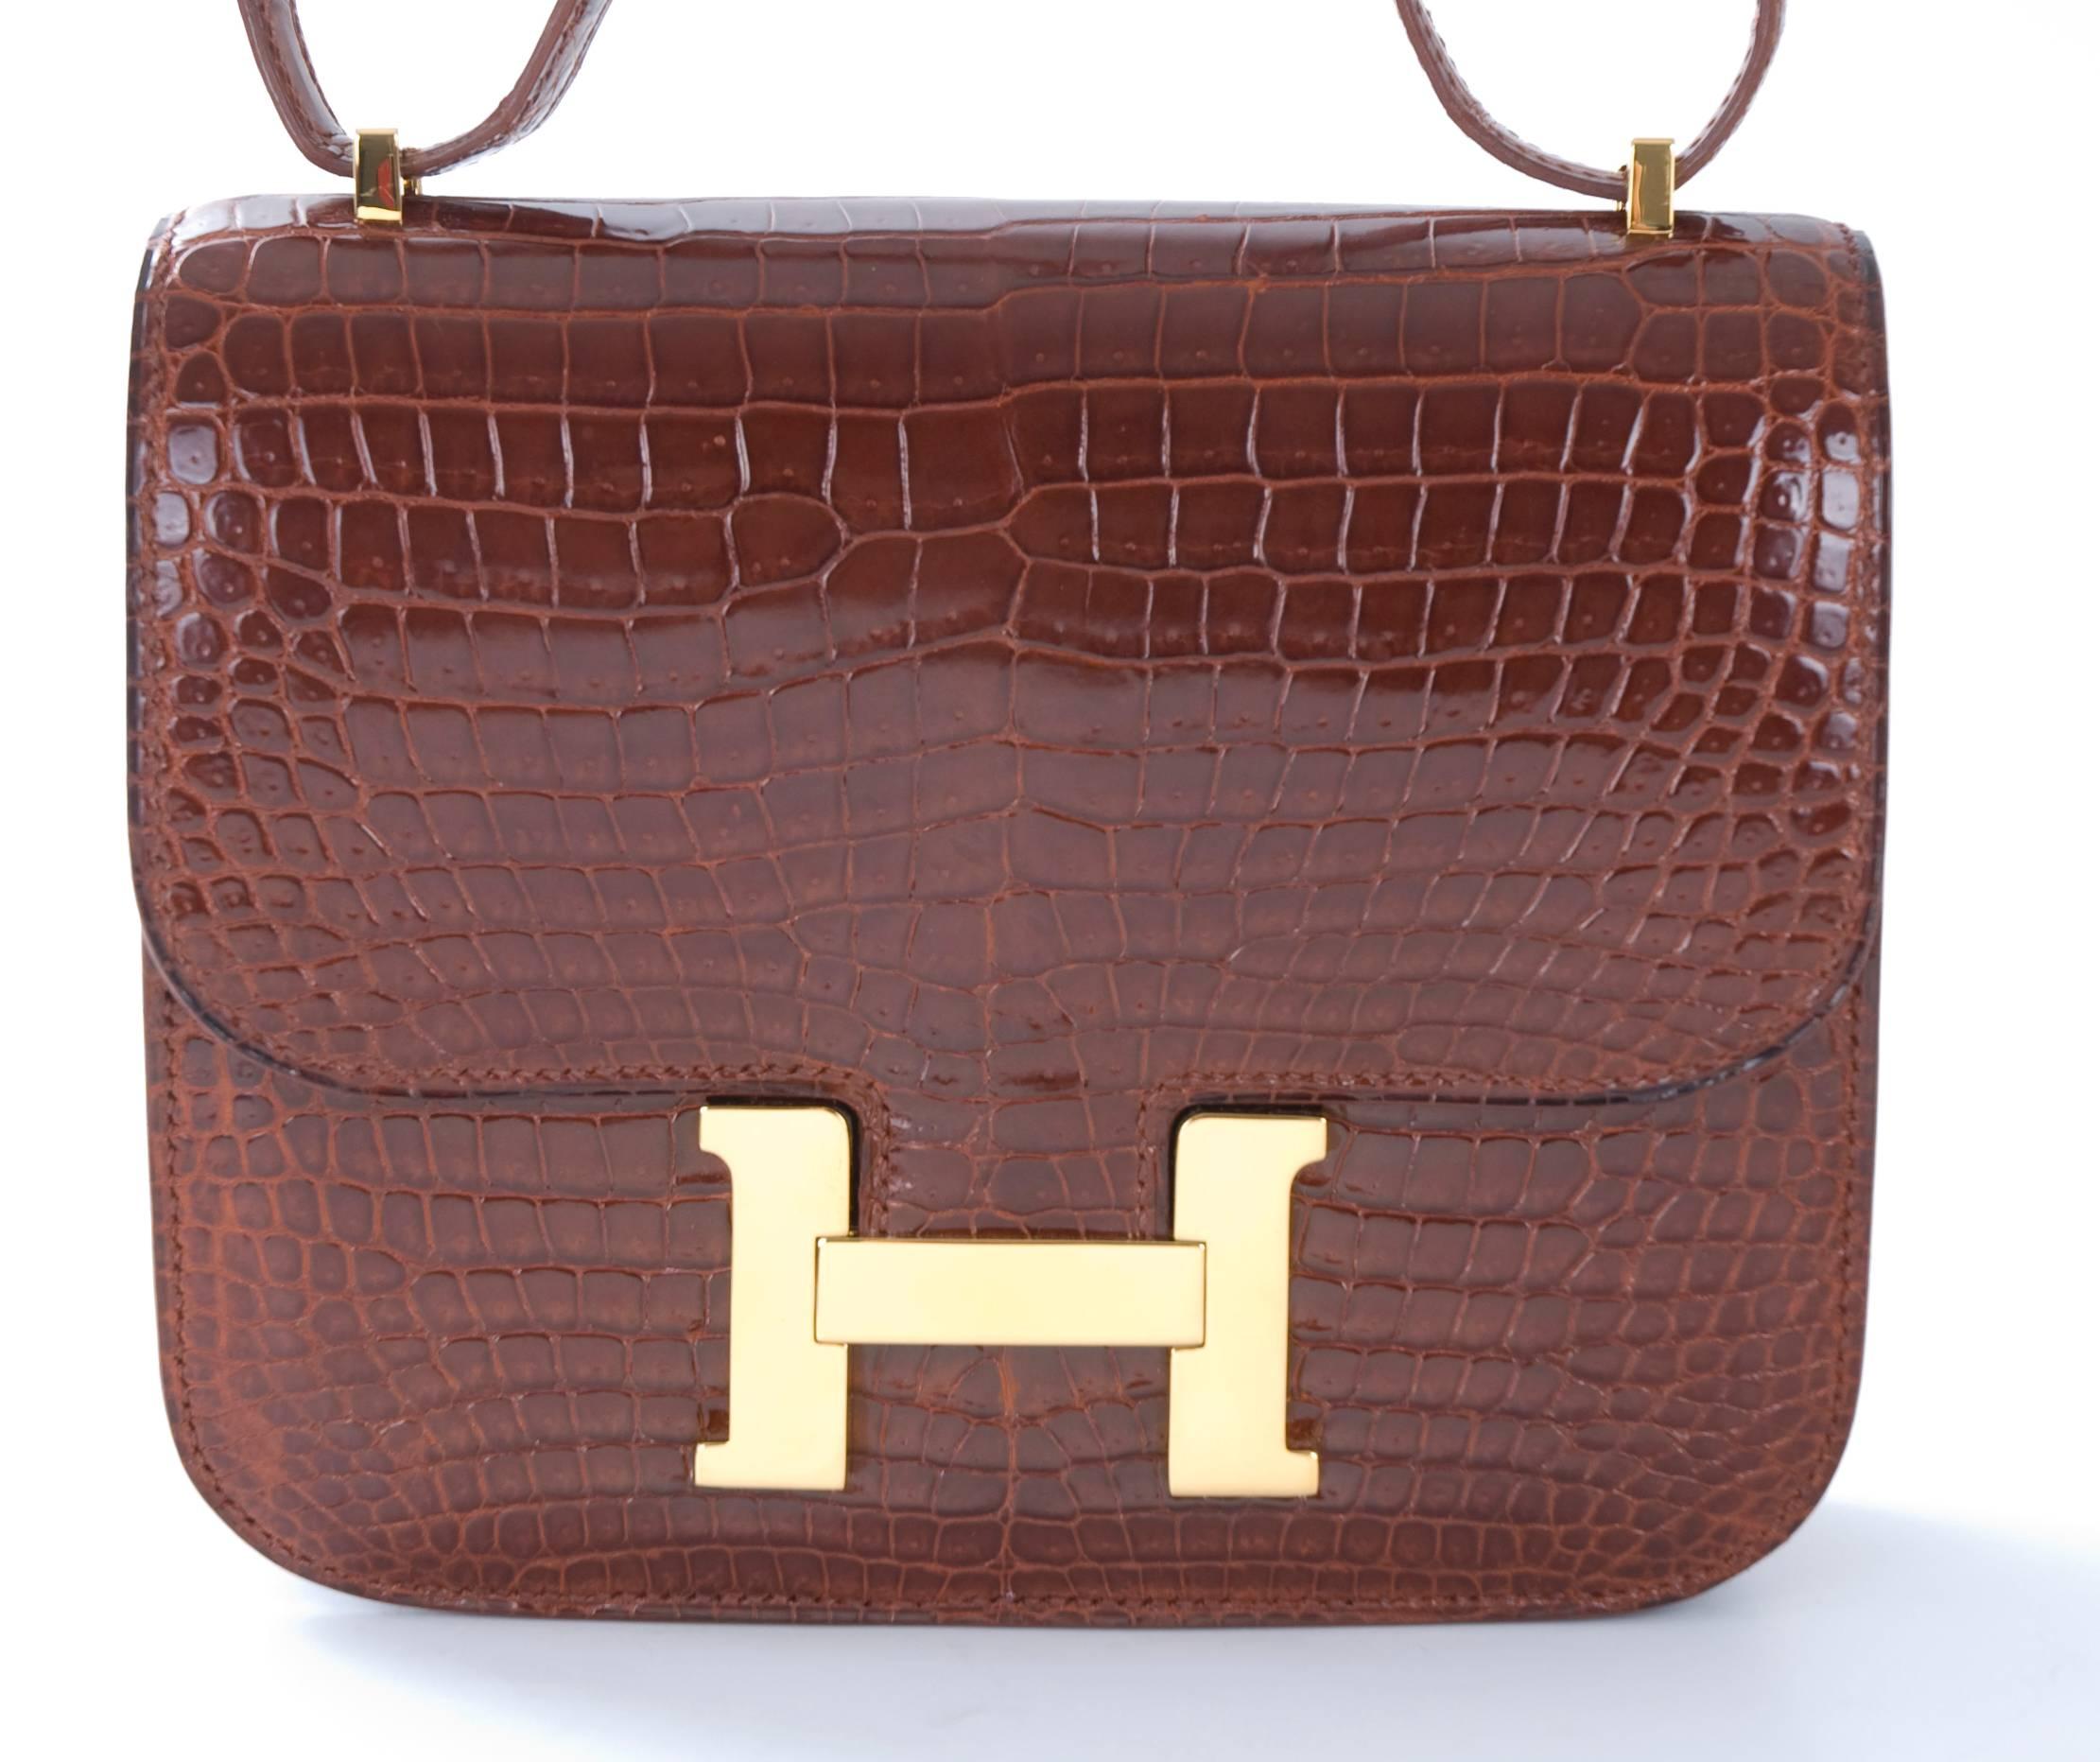 Hermes 18cm mini Constance bag double gusset shiny porosus crocodile in color cognac.
Excellent condition - only a few scratches on the gold hardware.
Clean inside and out.
Stamp: A in a square from 1997.
Next to the Hermes Paris Stamp, a Caret